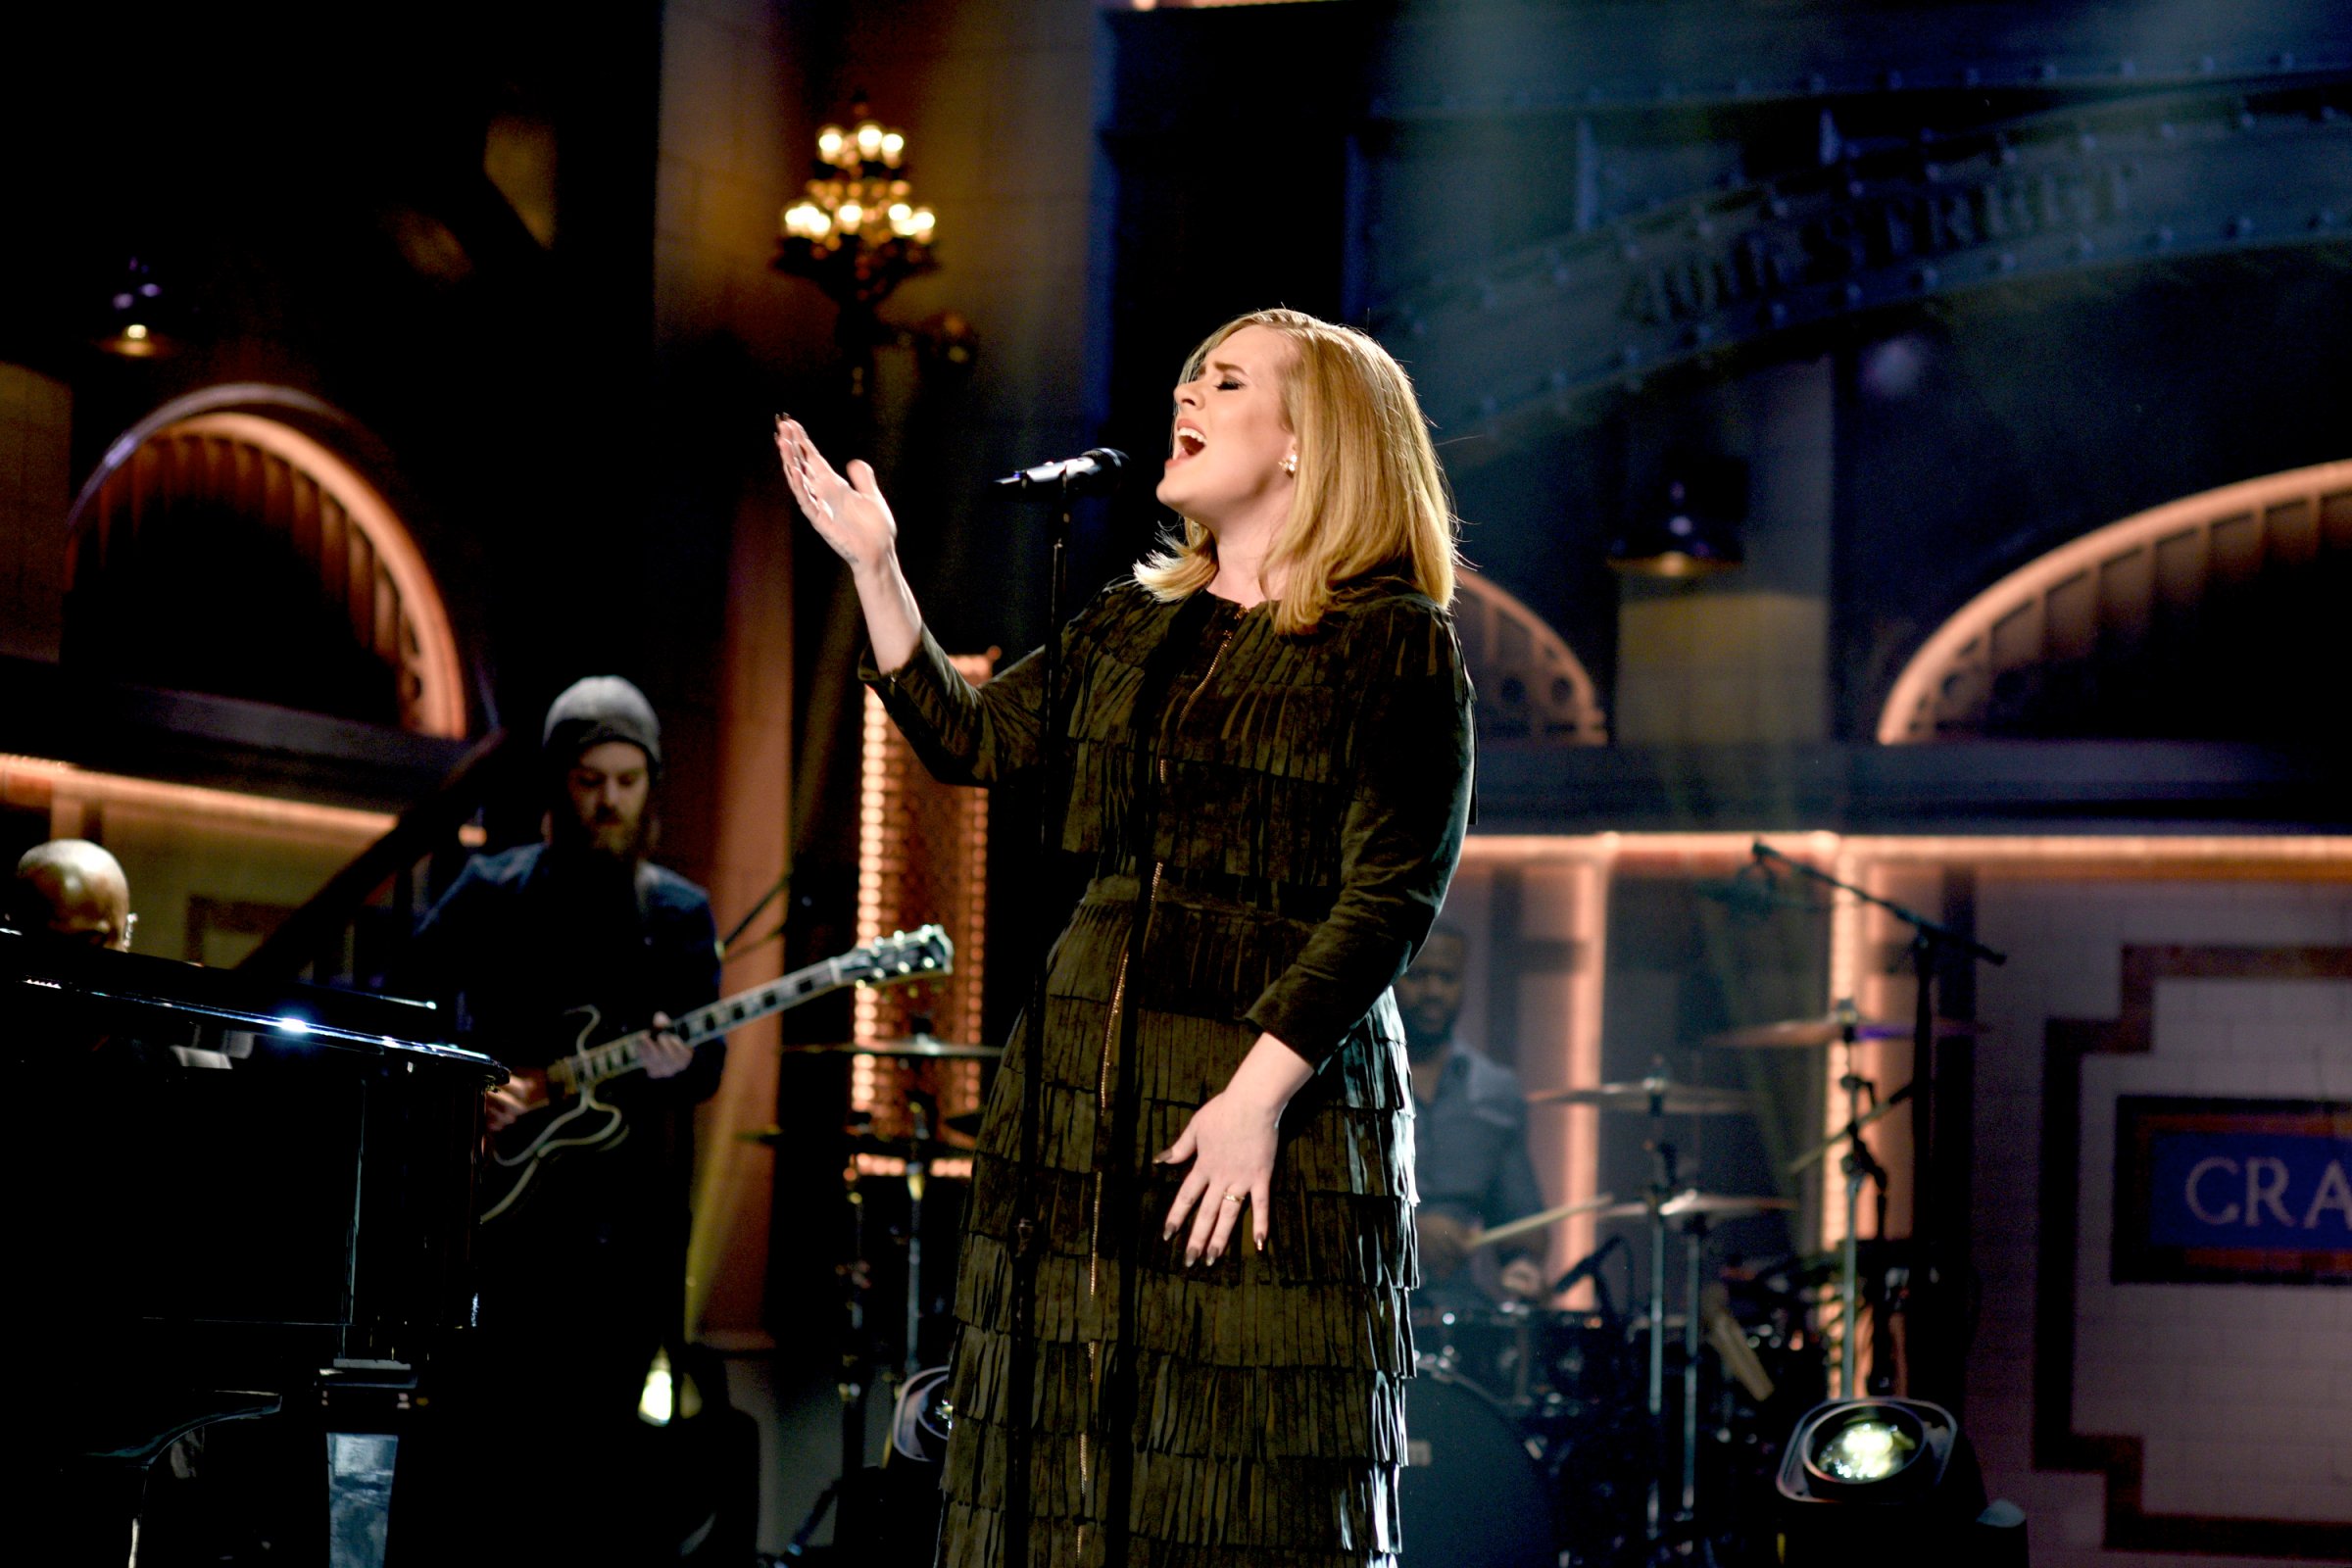 Musical guest Adele performs on Saturday Night Live in New York City on Nov. 21, 2015.